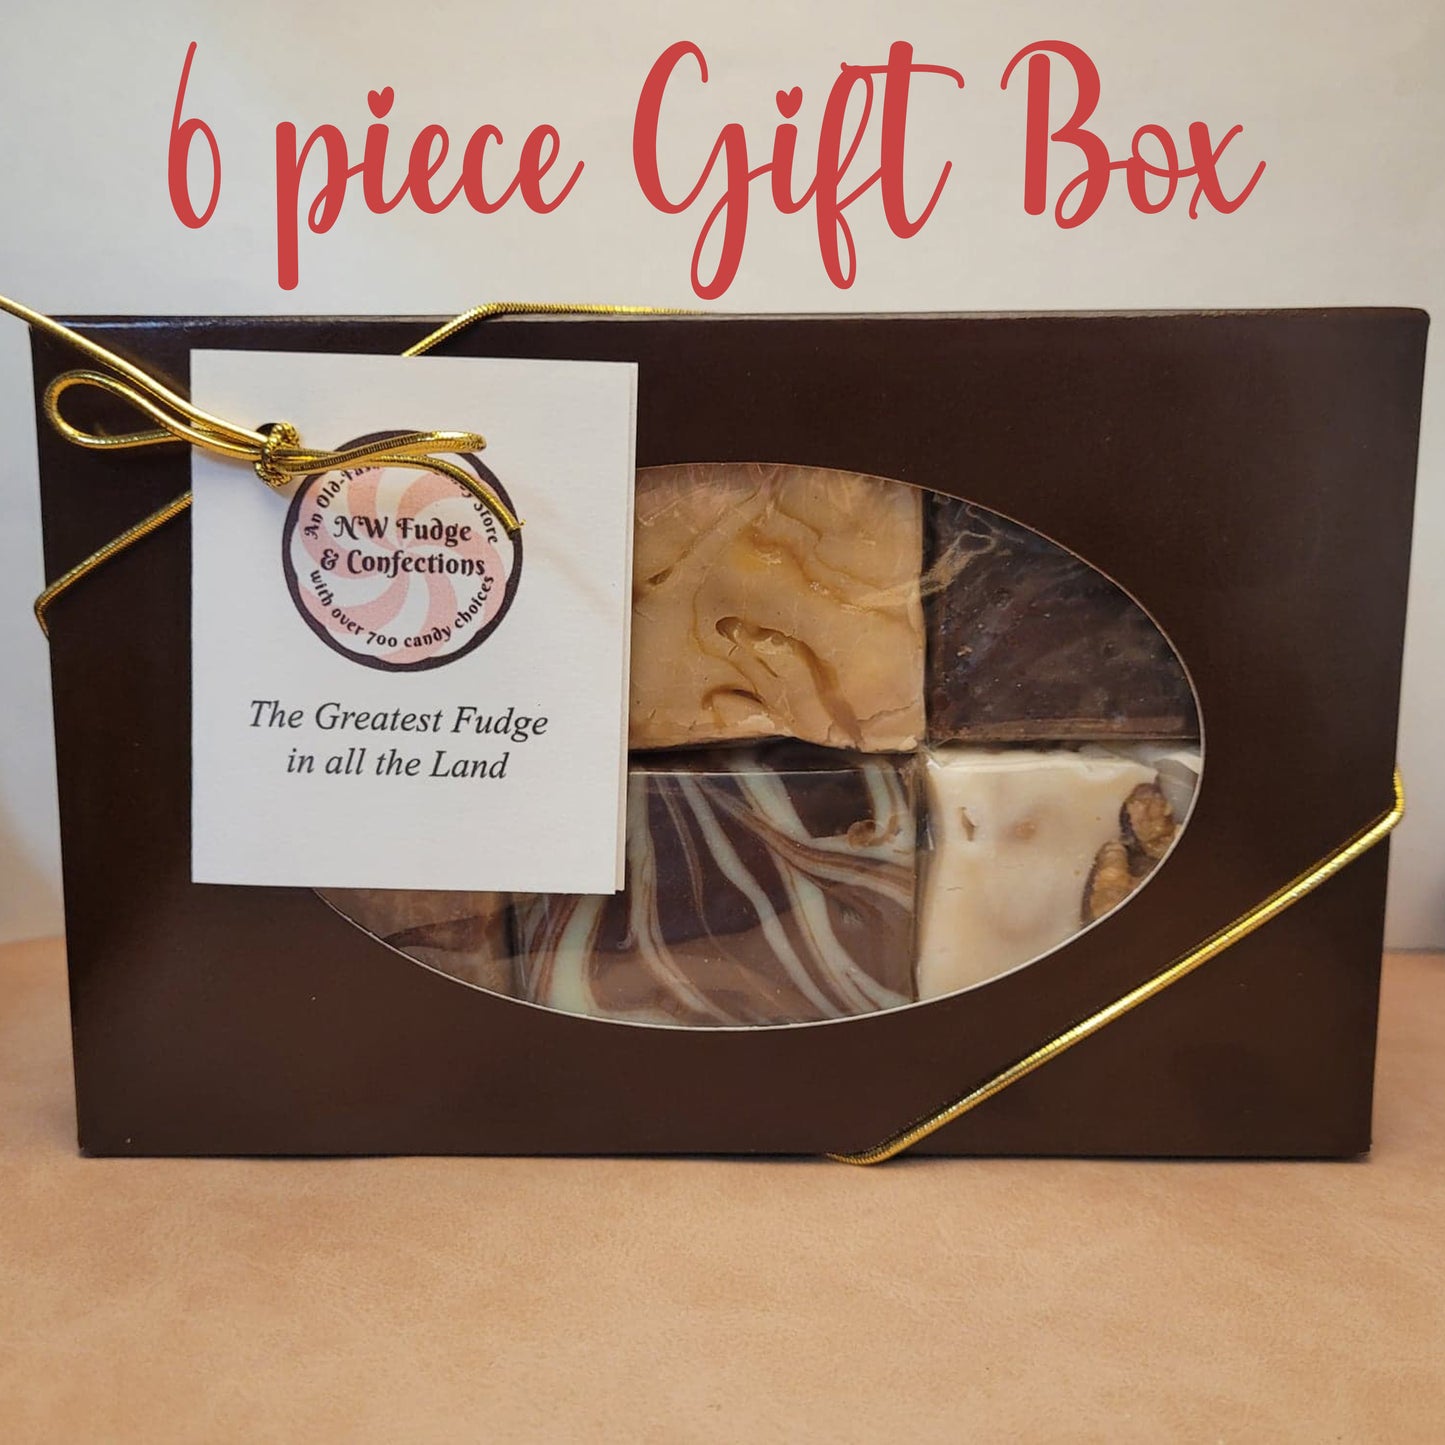 6 PIECE FALL FUDGE SAMPLER - Your choice of 6 fall flavors in a gift box